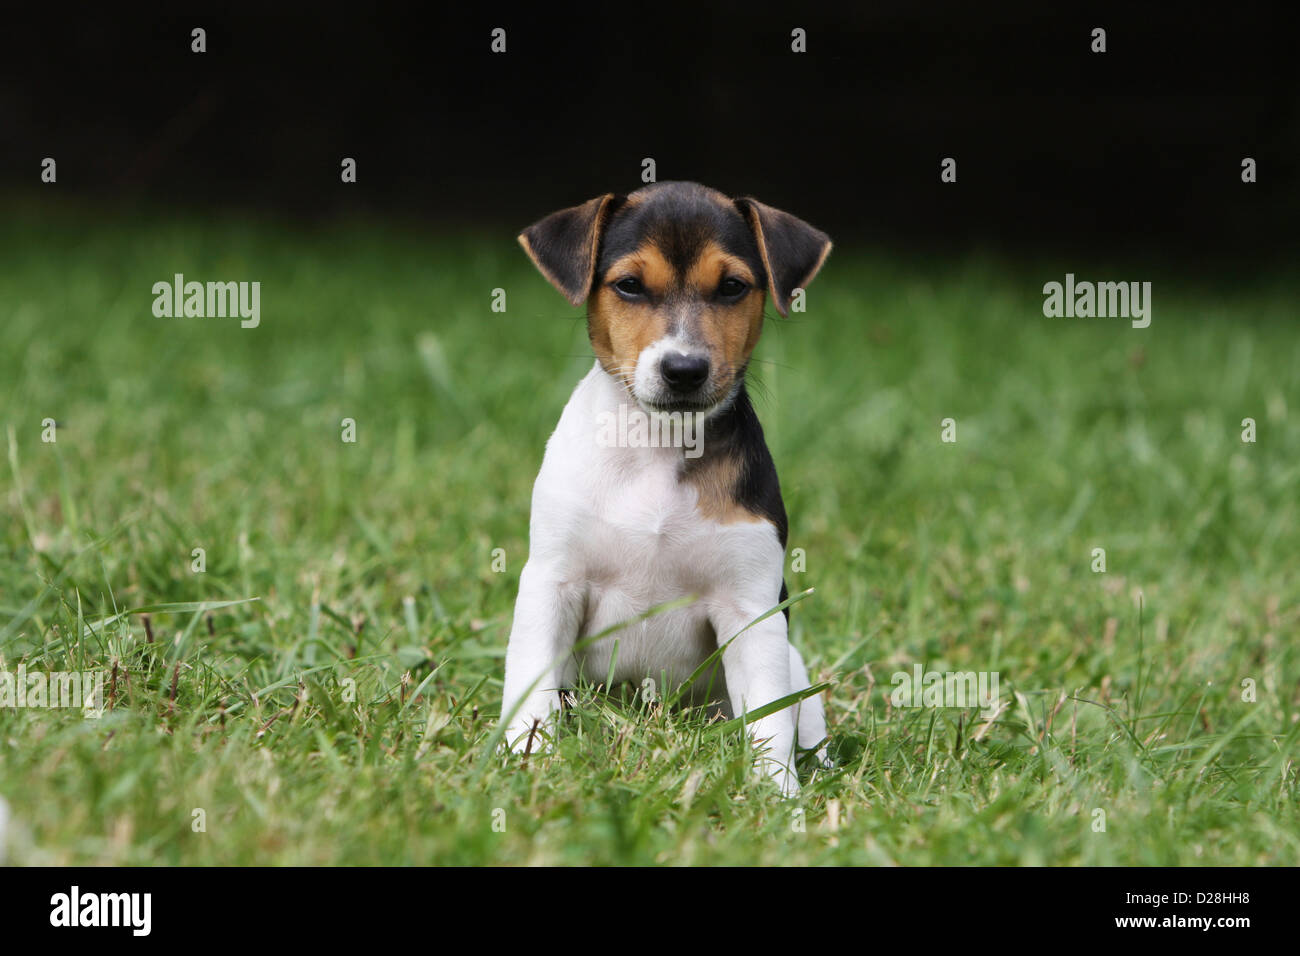 Dog Parson Russell Terrier  puppy Stock Photo